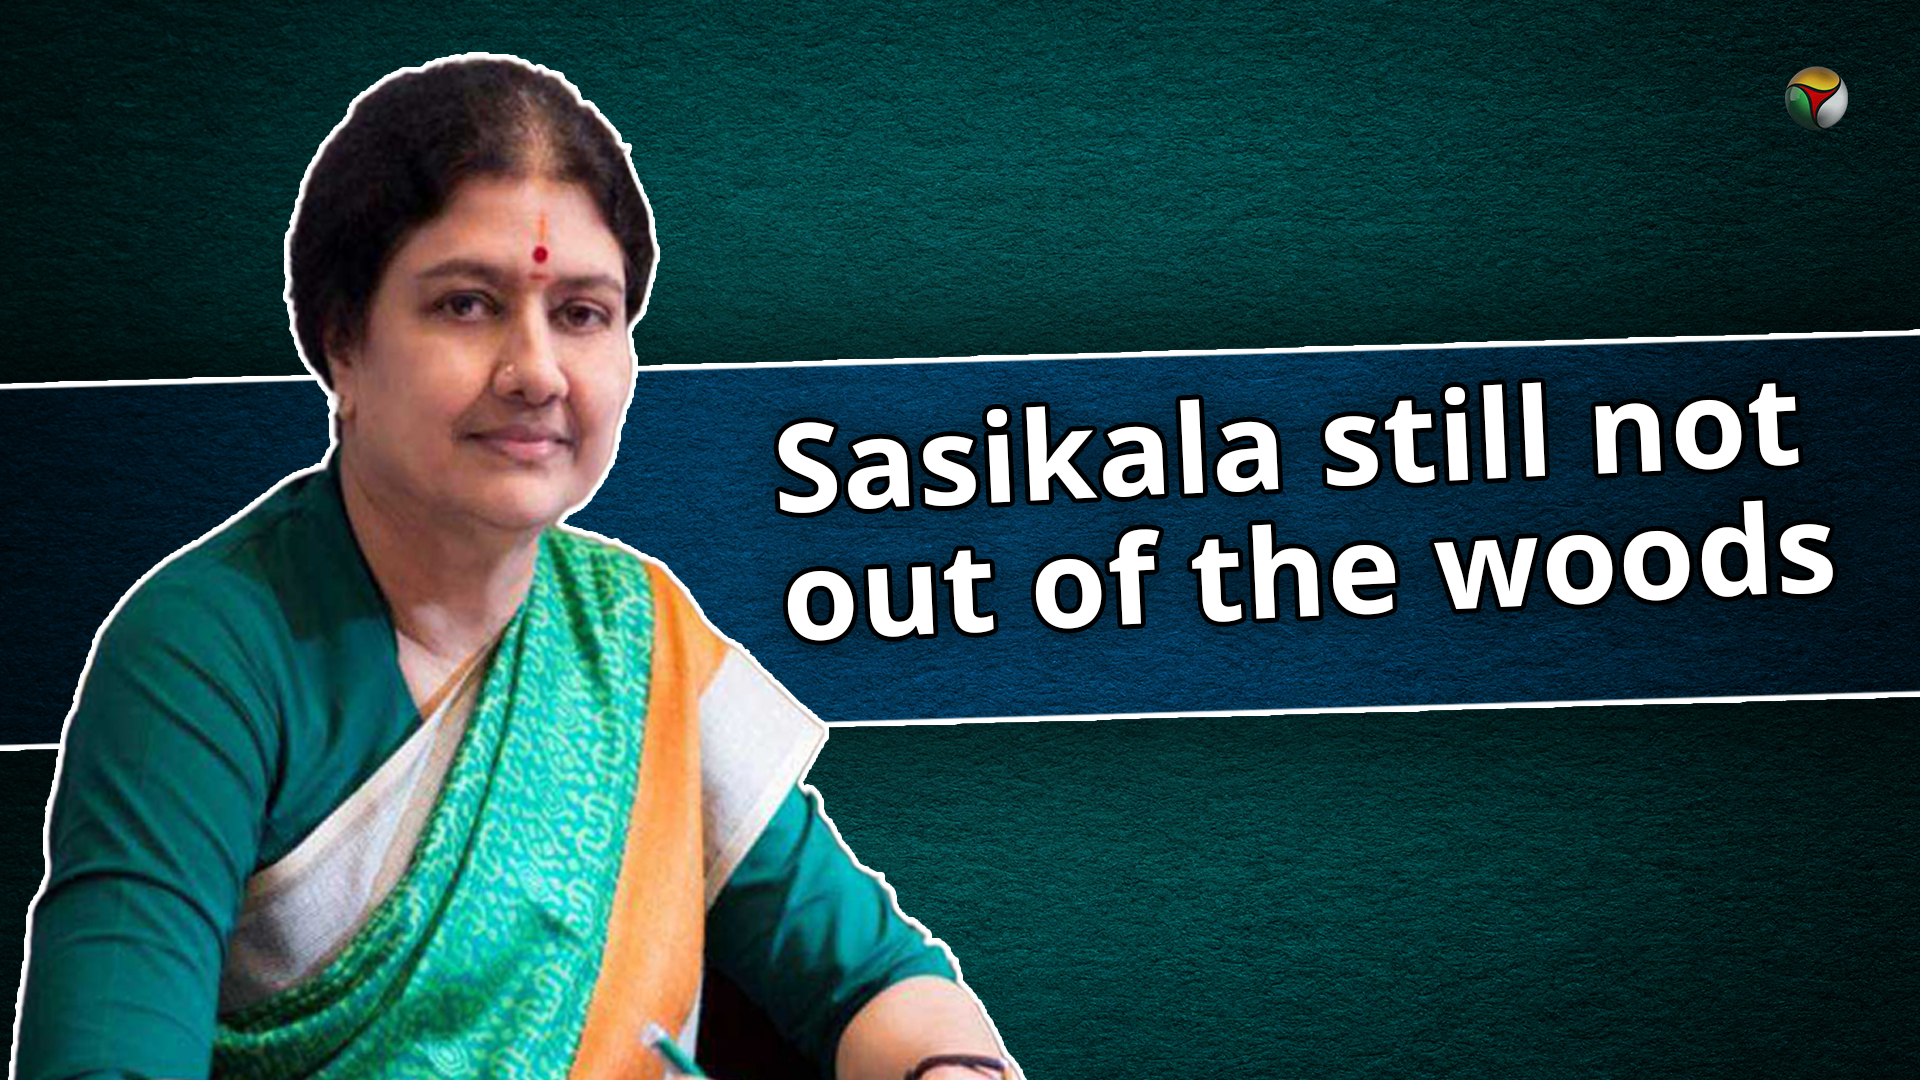 Sasikala still not out of the woods